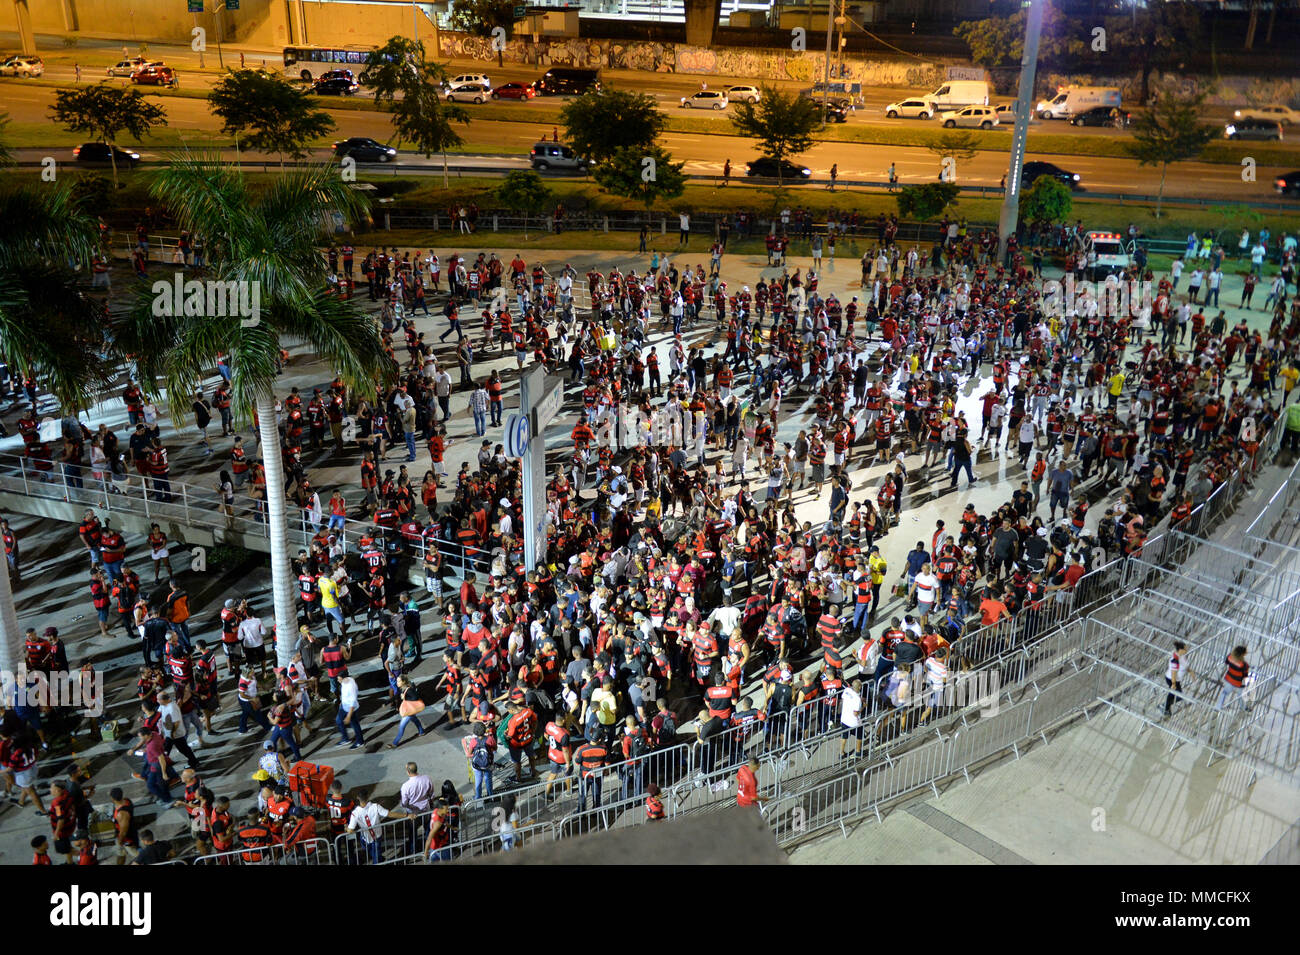 Rio De Janeiro, Brazil. 10th May, 2018. Arrival of the fans on the subway ramp during Flamengo vs. Ponte Preta held in Maracanã for the Eighth Finals of the Brazil Cup in Rio de Janeiro, RJ. Credit: Celso Pupo/FotoArena/Alamy Live News Stock Photo